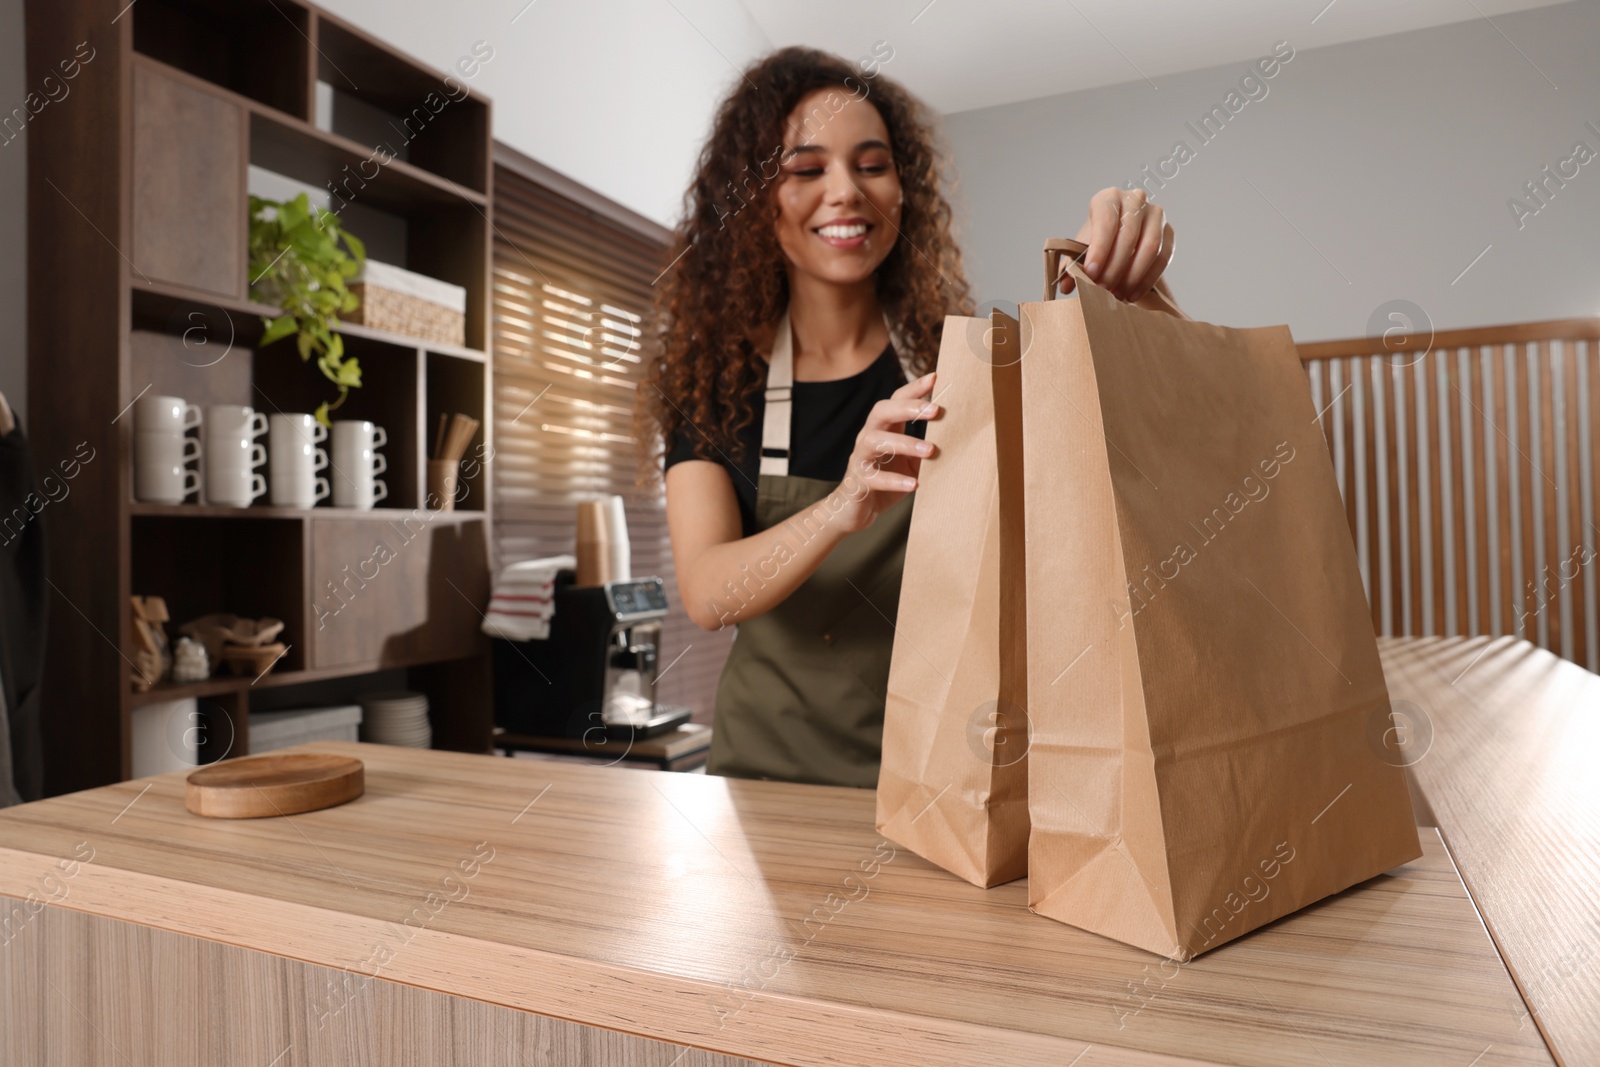 Photo of Worker with paper bags at counter in cafe, focus on hands